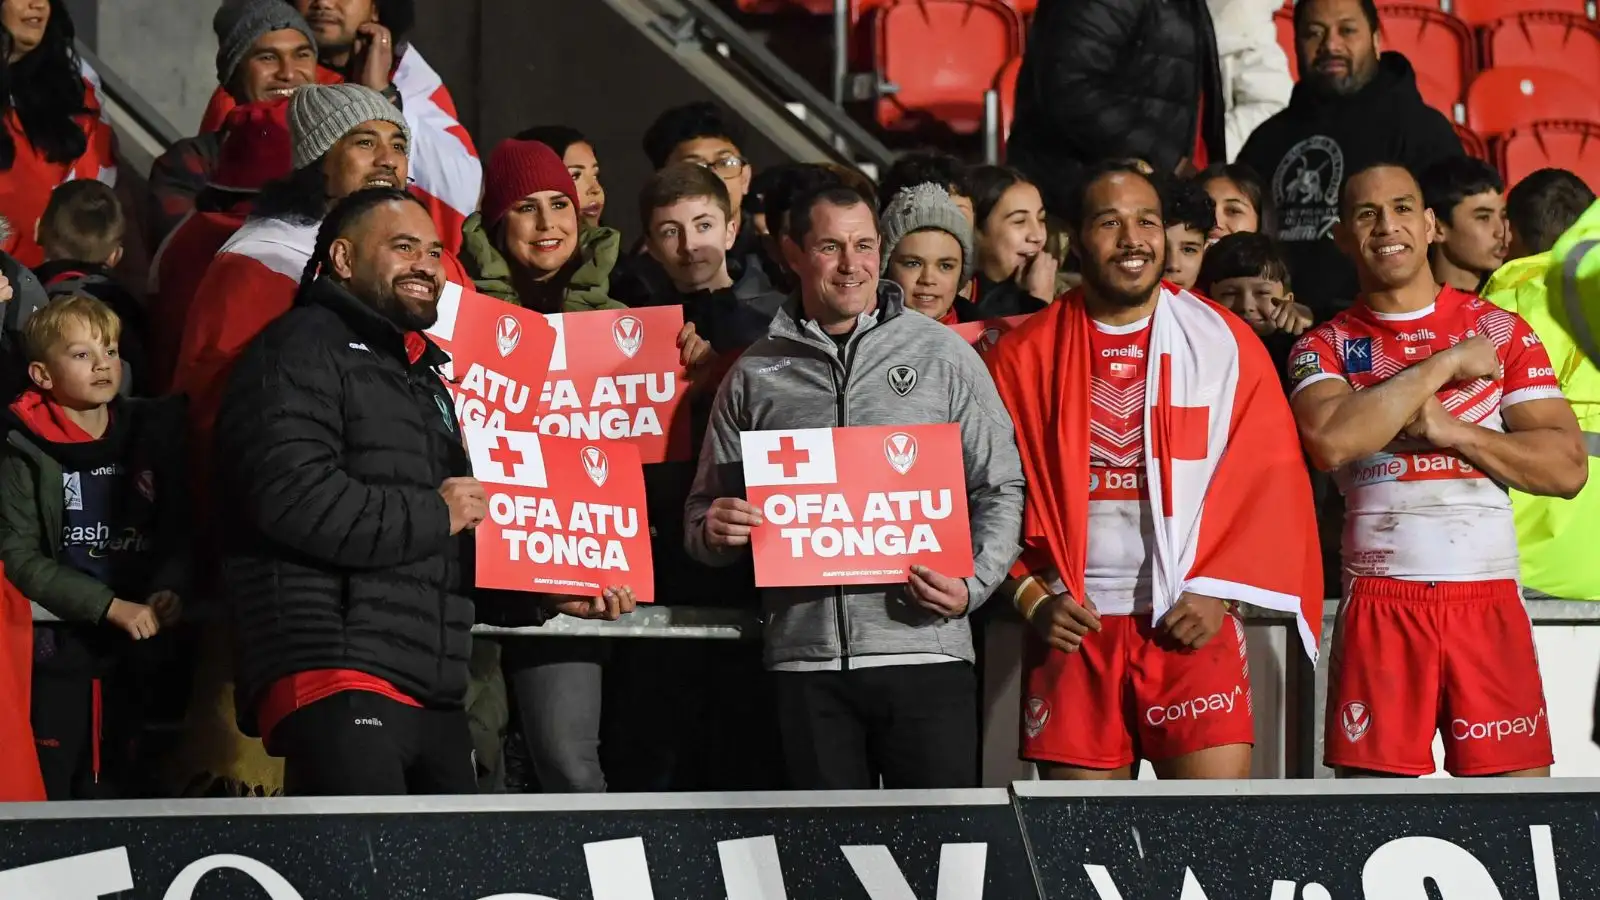 St Helens old boy Kristian Woolf beams over return to town with Tonga: ‘It feels like coming home’